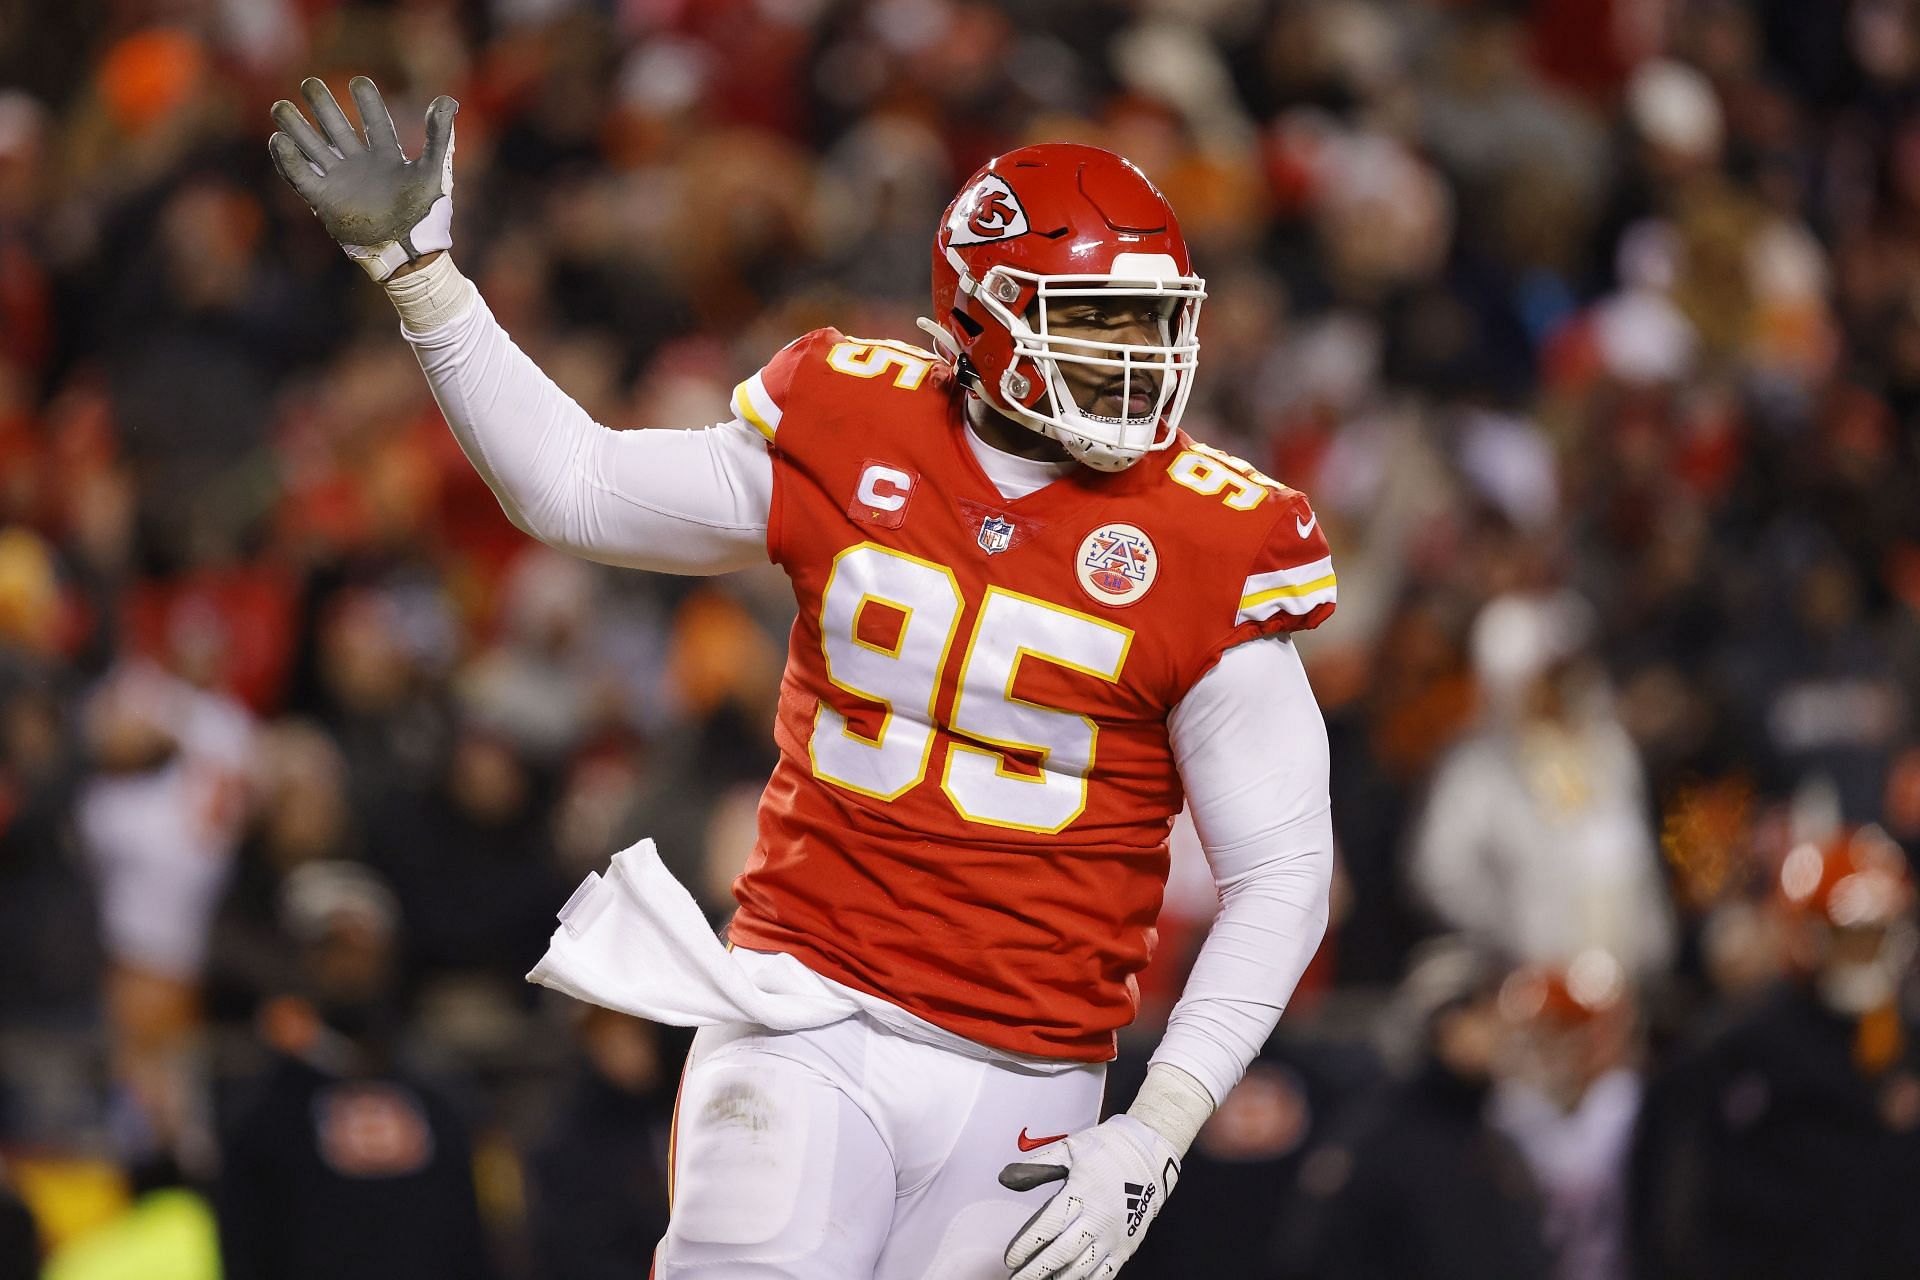 Chris Jones #95 of the Kansas City Chiefs reacts after sacking Joe Burrow #9 of the Cincinnati Bengals during the fourth quarter in the AFC Championship Game at GEHA Field at Arrowhead Stadium on January 29, 2023 in Kansas City, Missouri. (Photo by David Eulitt/Getty Images)